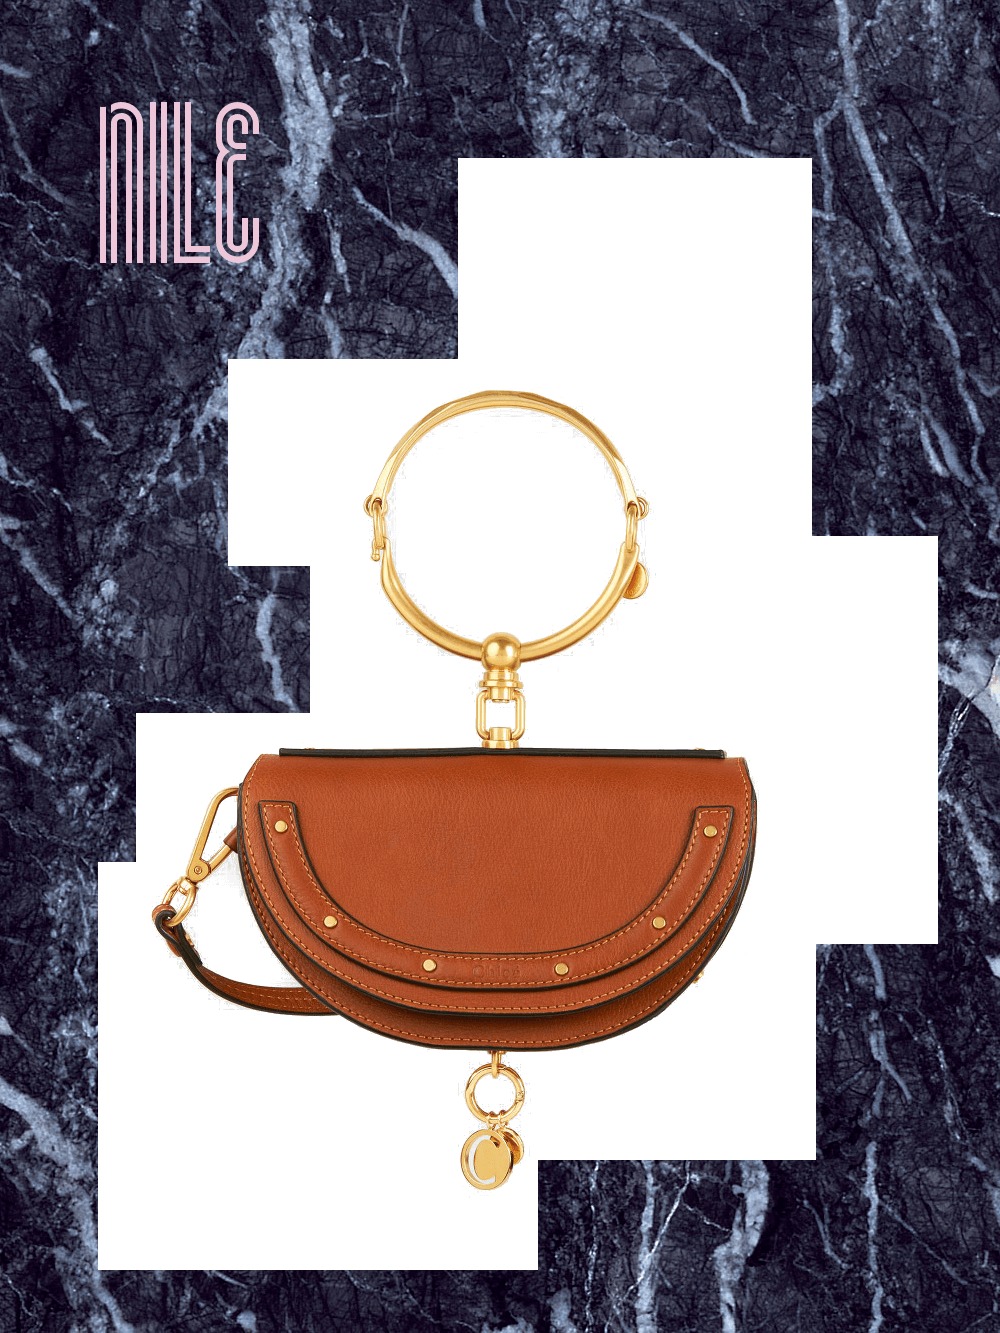 Chloé Nile Bag: The Fashion Blogger and Instagram Favorite Style